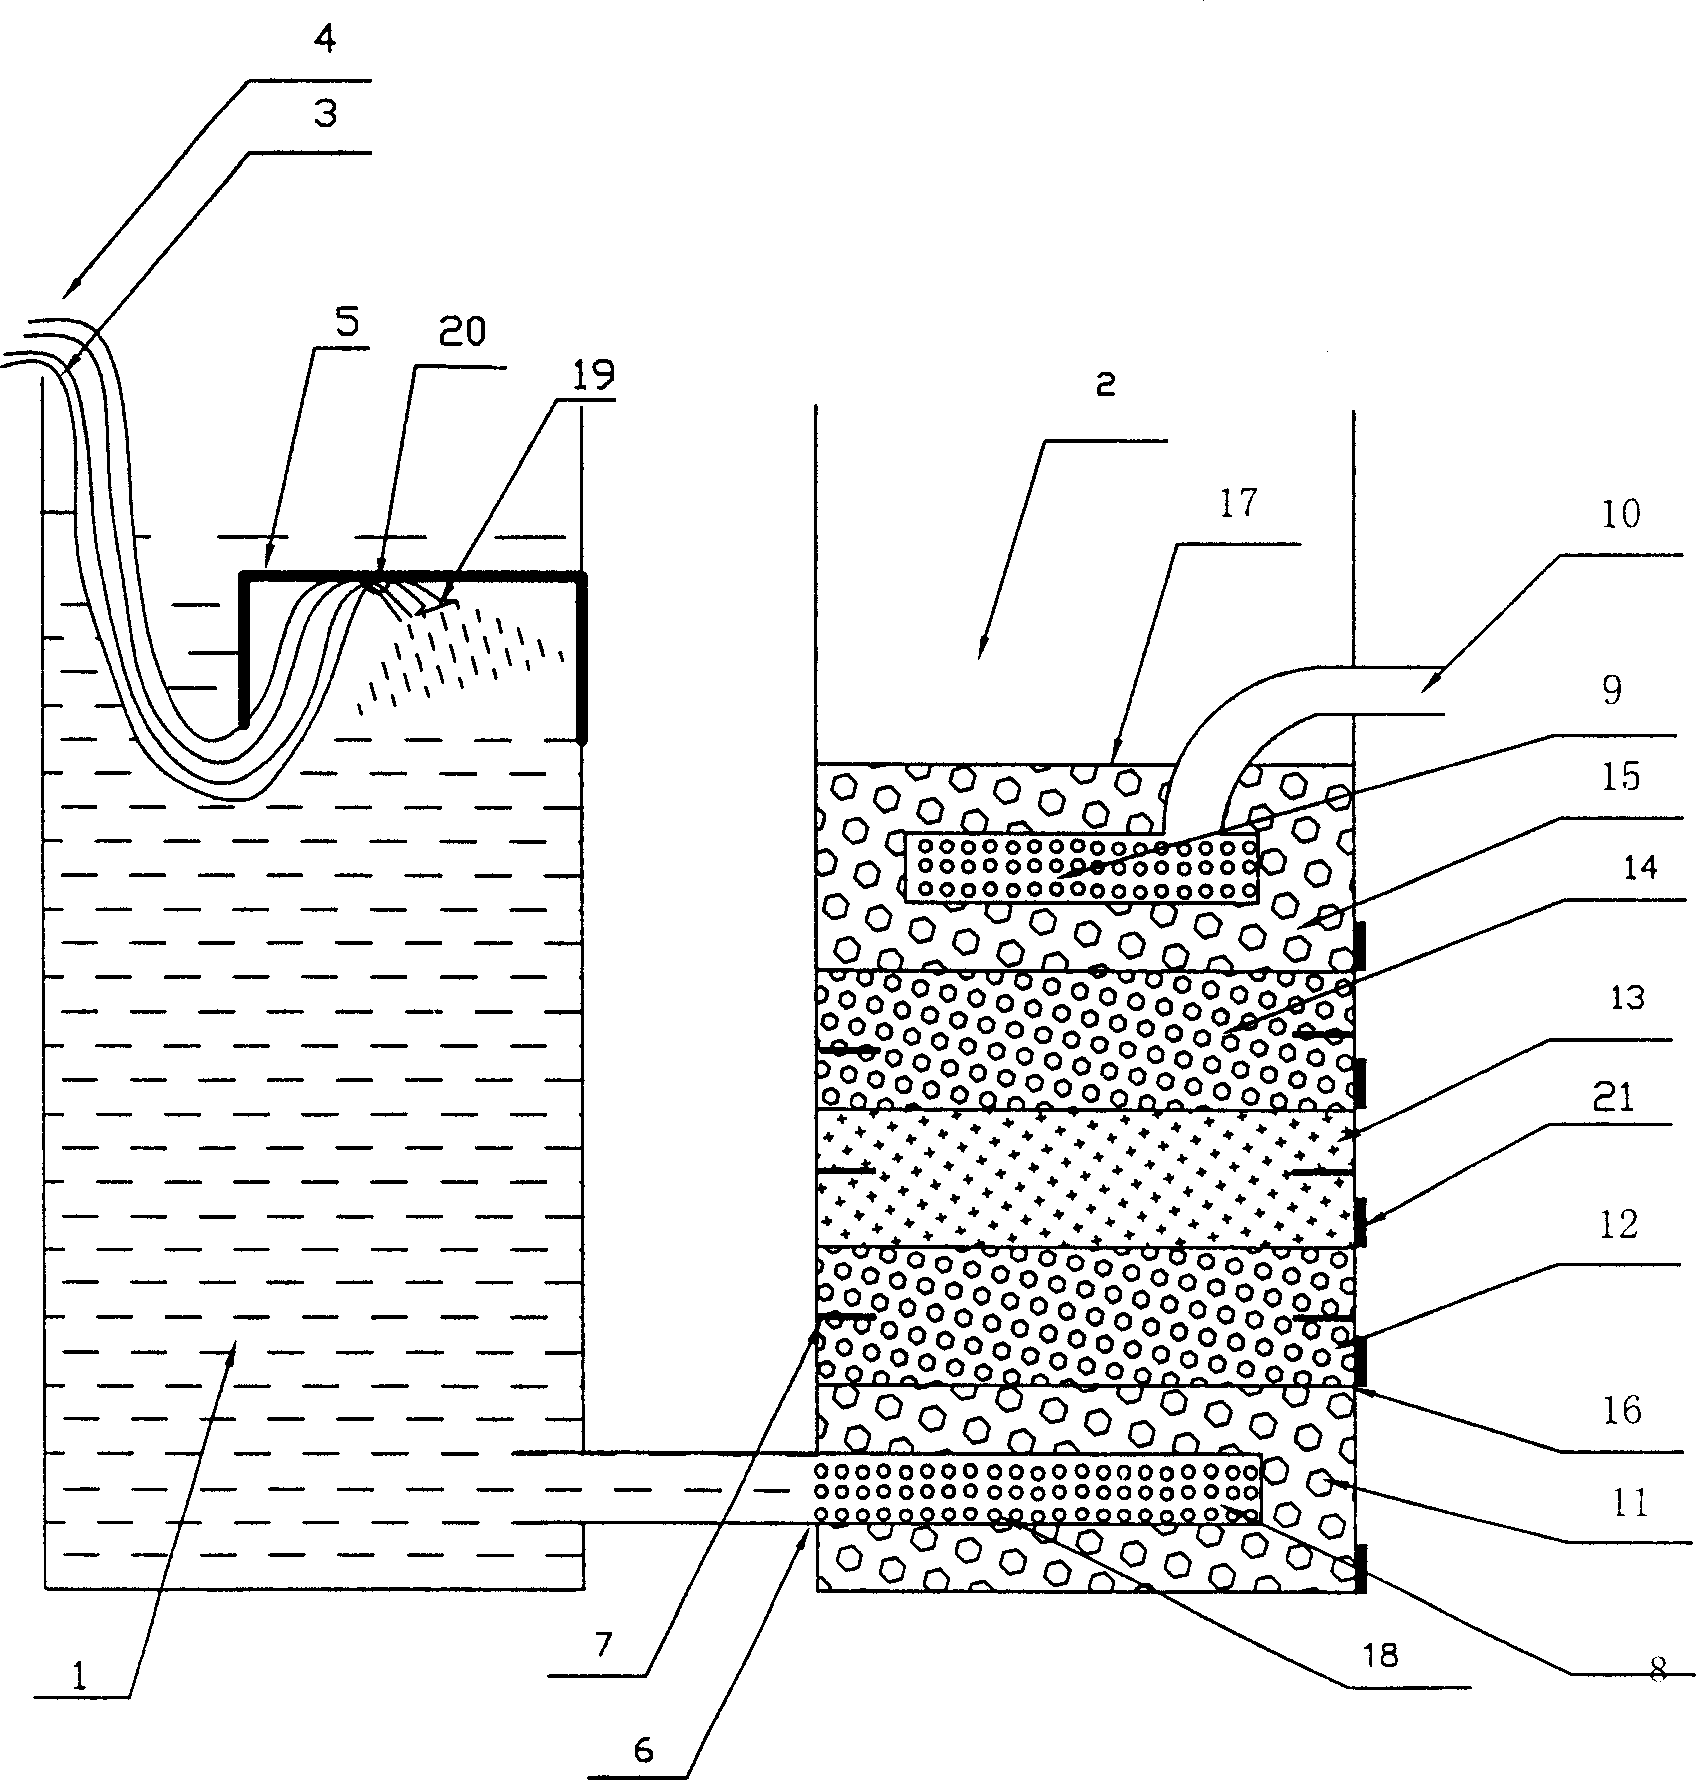 Lake purification system for controlling algae growth effectively and method thereof